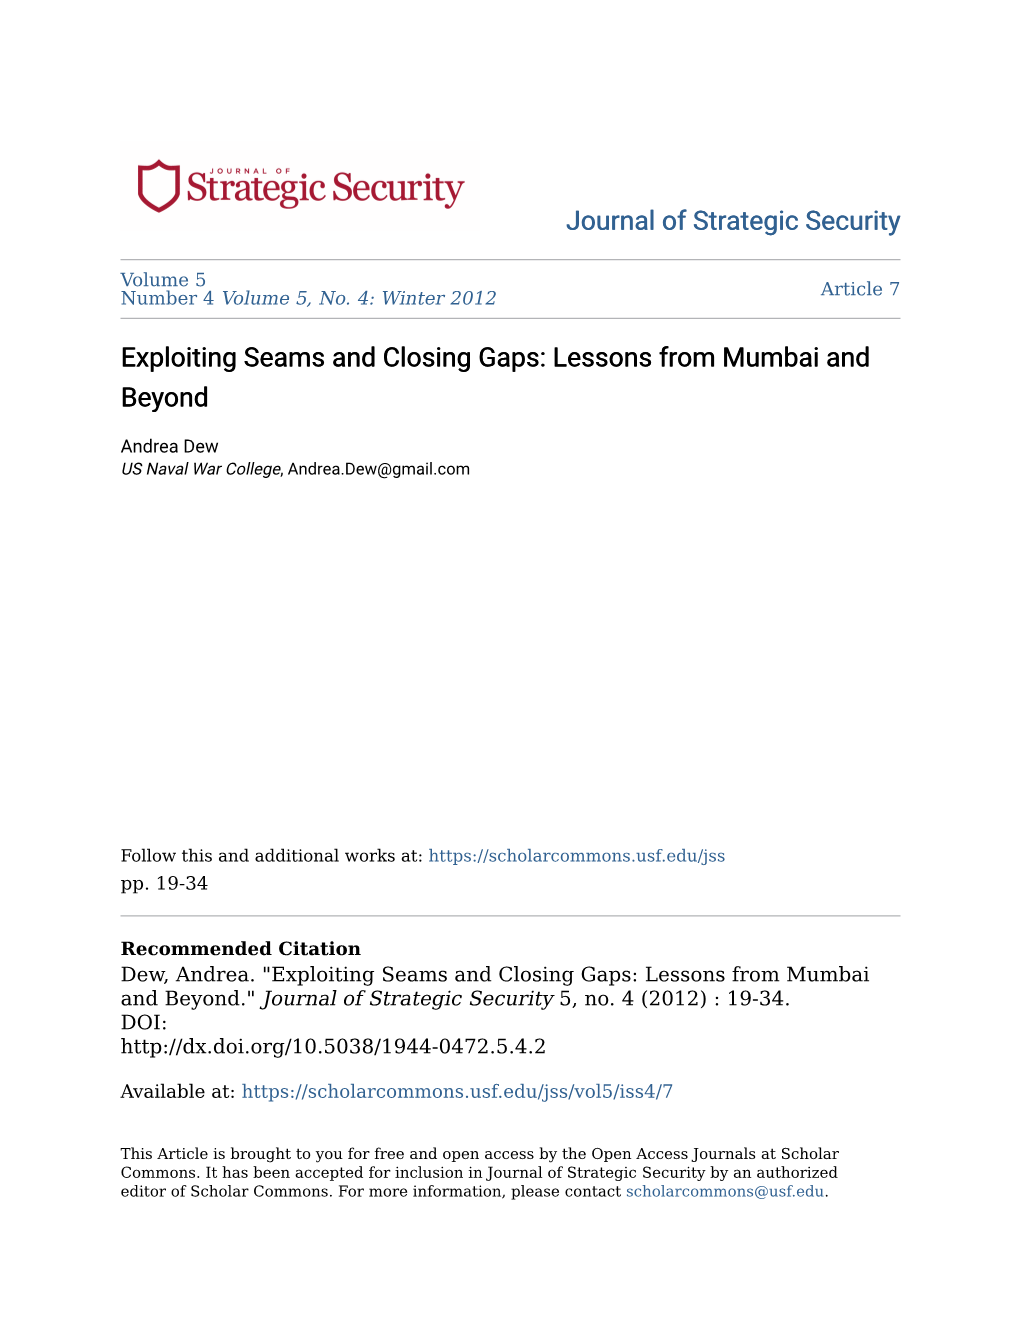 Exploiting Seams and Closing Gaps: Lessons from Mumbai and Beyond